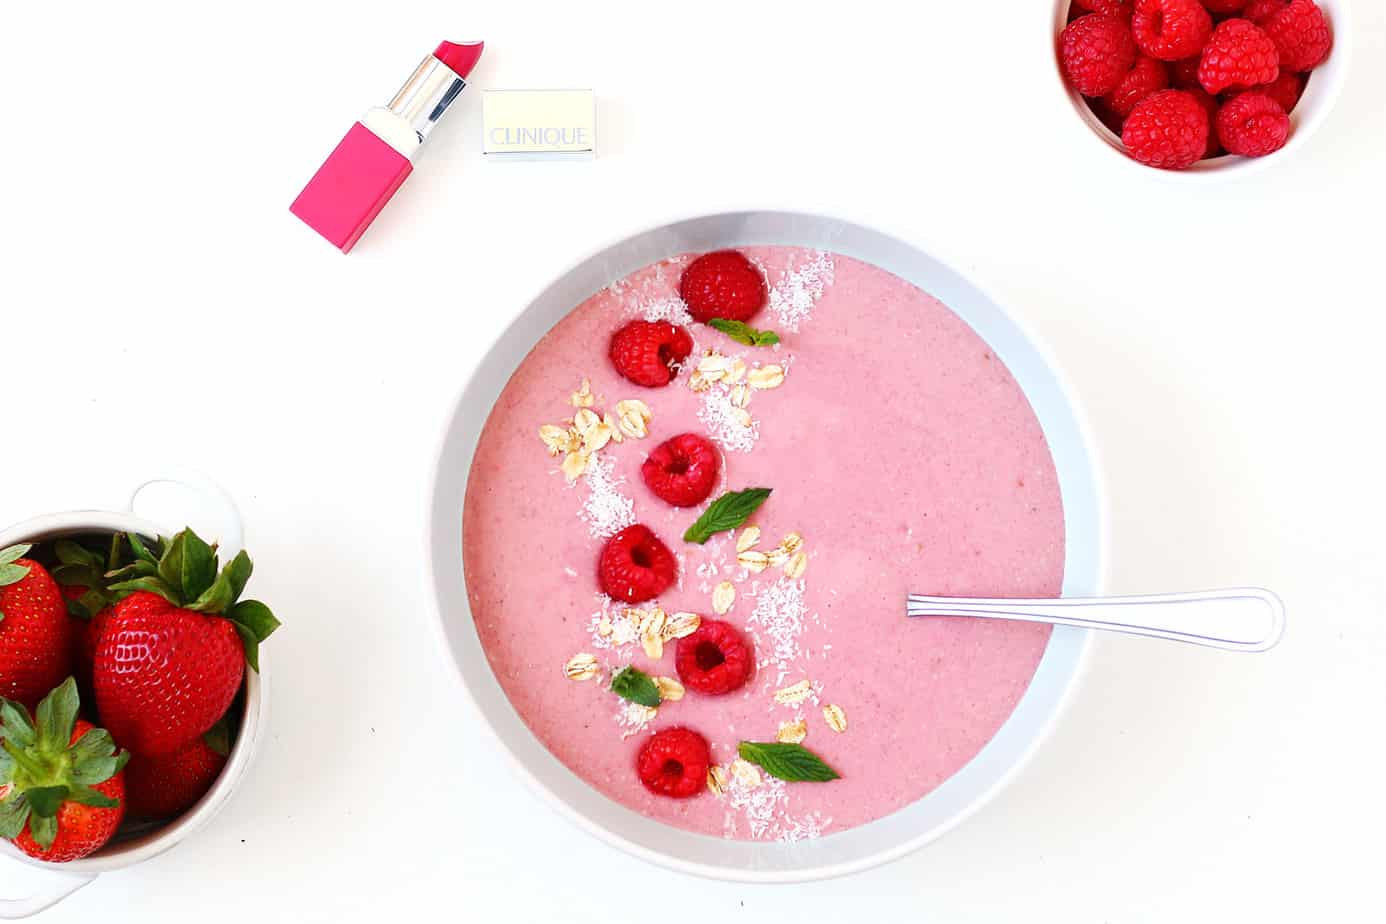 This 5 Ingredient Raspberry Smoothie Bowl is the perfect go to for a breakfast in the go. Packed with antioxidants and made with gluten free oats, banana and other delicious ingredients. A refreshing vegan breakfast.